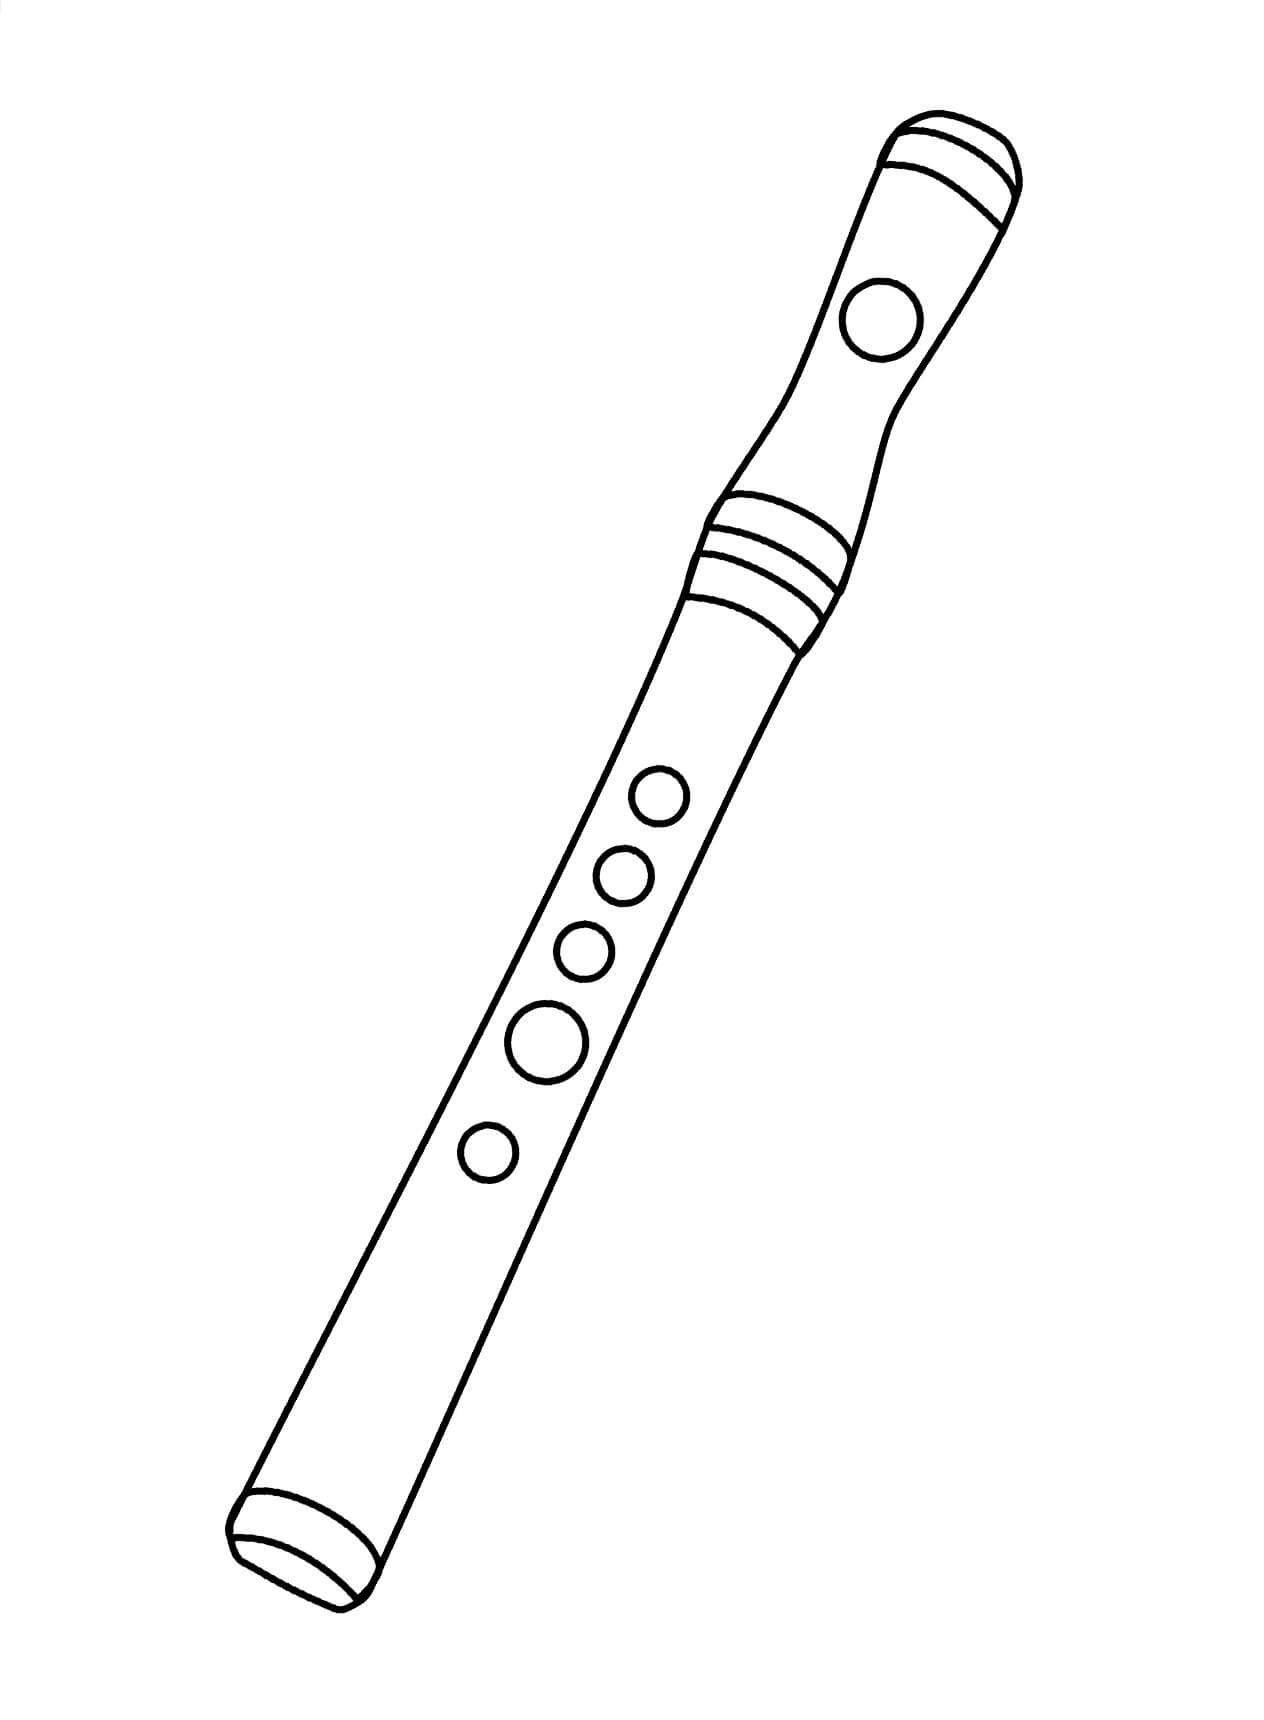 Printable Flute coloring page - Download, Print or Color Online for Free